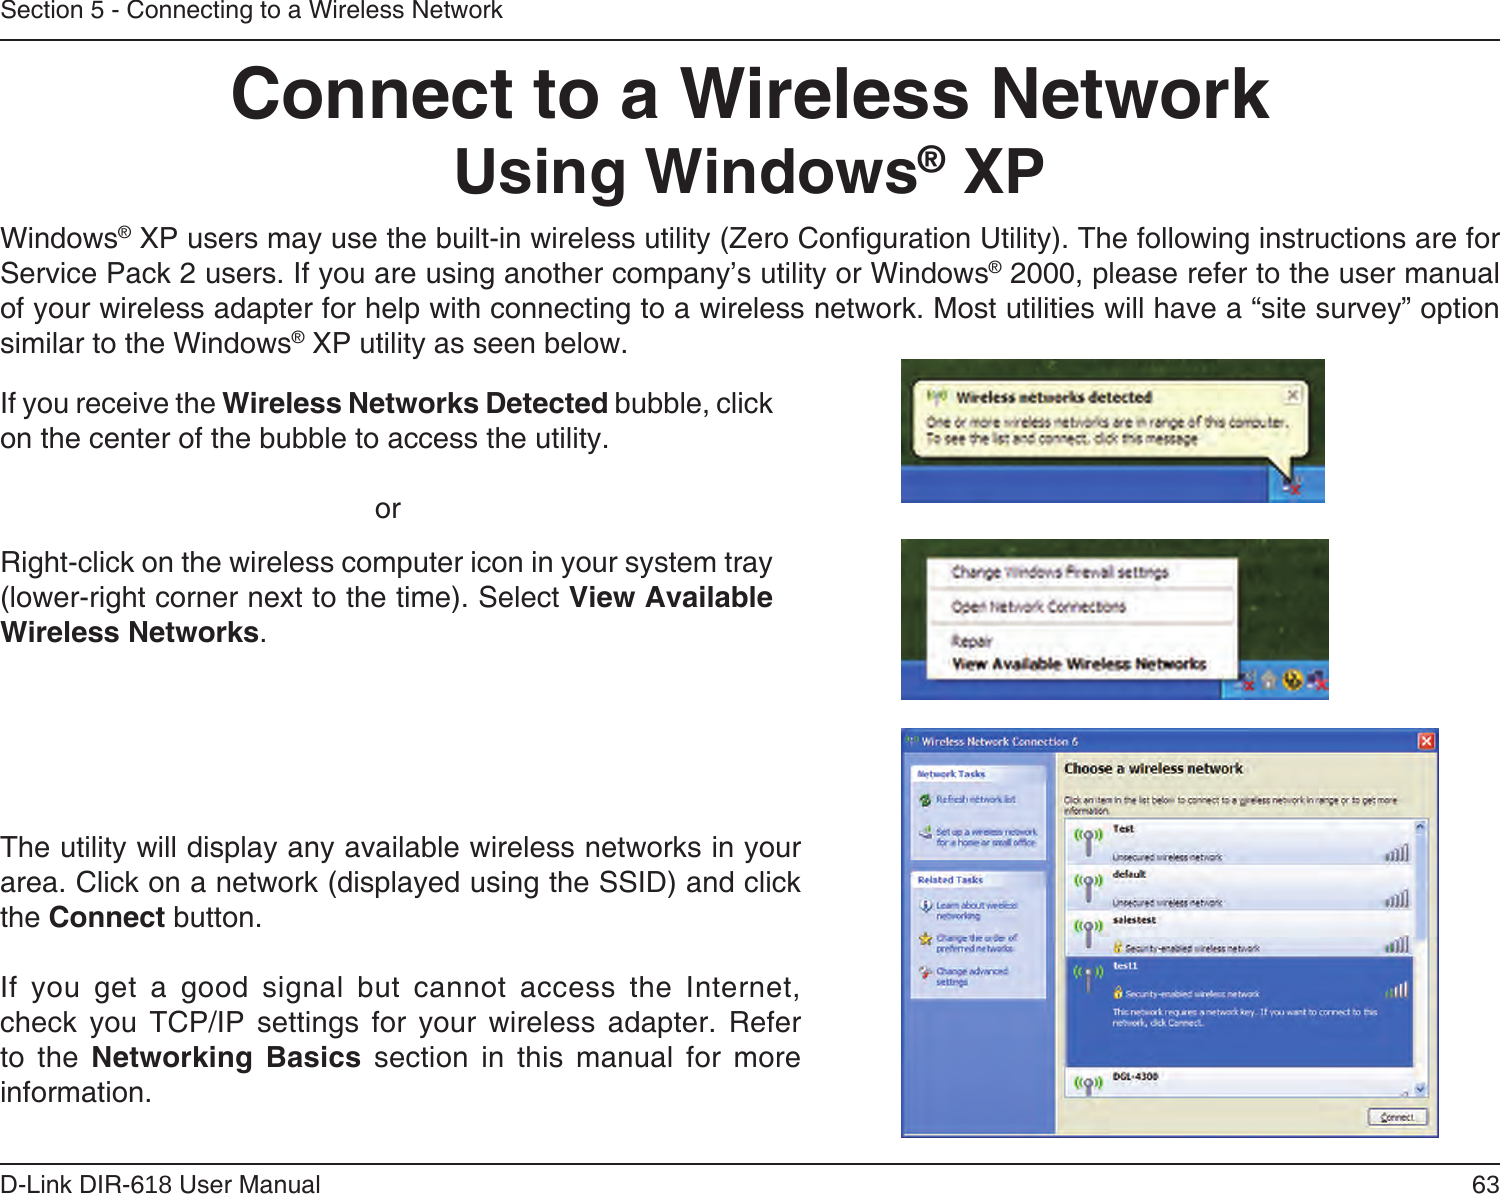 63D-Link DIR-618 User ManualSection 5 - Connecting to a Wireless NetworkConnect to a Wireless NetworkUsing Windows® XPWindows® XP users may use the built-in wireless utility (Zero Conguration Utility). The following instructions are for Service Pack 2 users. If you are using another company’s utility or Windows® 2000, please refer to the user manual of your wireless adapter for help with connecting to a wireless network. Most utilities will have a “site survey” option similar to the Windows® XP utility as seen below.Right-click on the wireless computer icon in your system tray (lower-right corner next to the time). Select View Available Wireless Networks.If you receive the Wireless Networks Detected bubble, click on the center of the bubble to access the utility.     orThe utility will display any available wireless networks in your area. Click on a network (displayed using the SSID) and click the Connect button.If  you  get  a  good  signal  but  cannot  access  the  Internet, check  you  TCP/IP  settings  for  your  wireless  adapter.  Refer to  the  Networking  Basics  section  in  this  manual  for  more information.